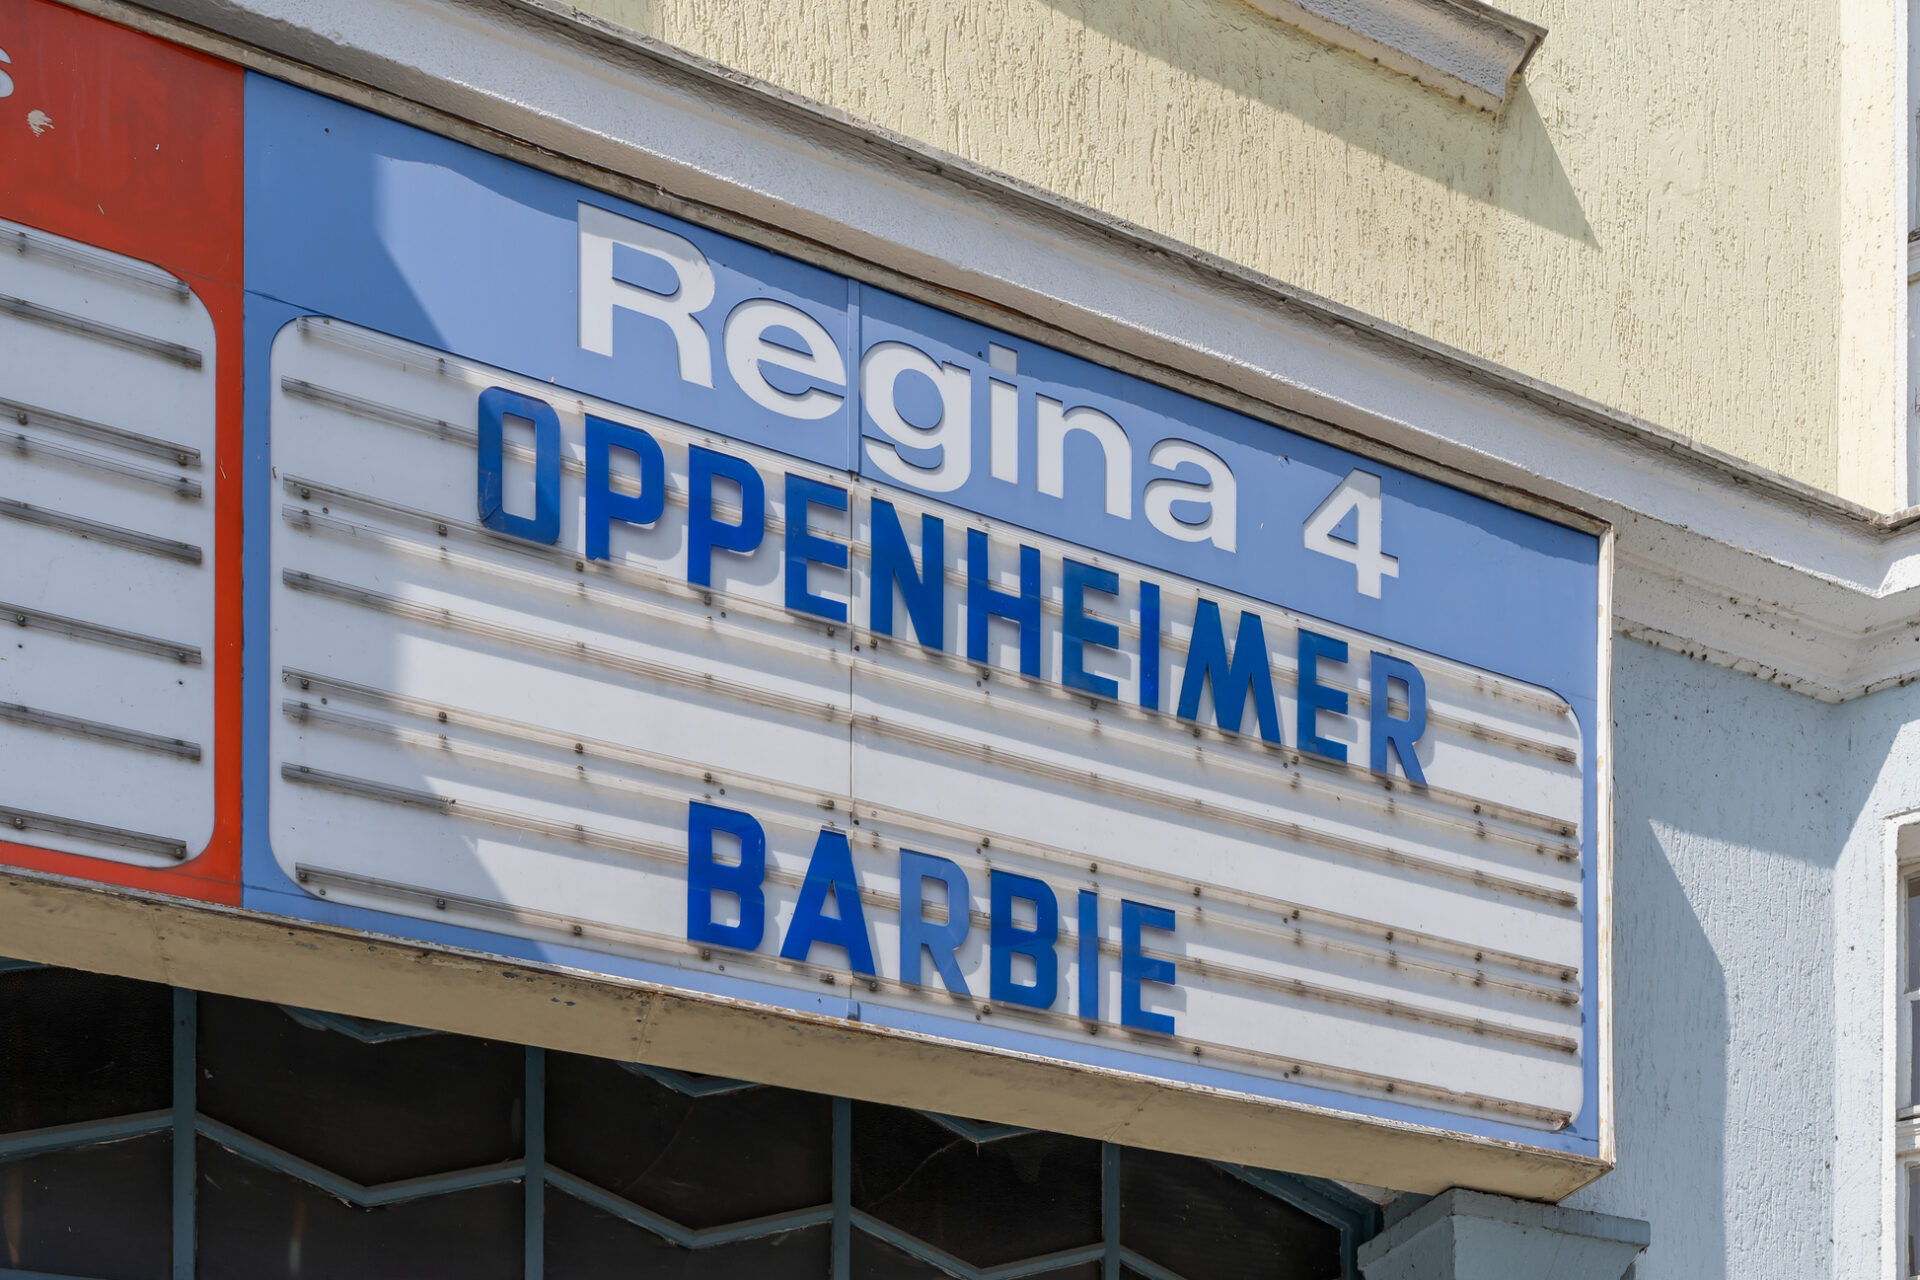 Display of the performance of the films "Oppenheimer" and "Barbie" 2023 at Scala Kino Hof cinema (PantheraLeo1359531 via Wikimedia Commons)